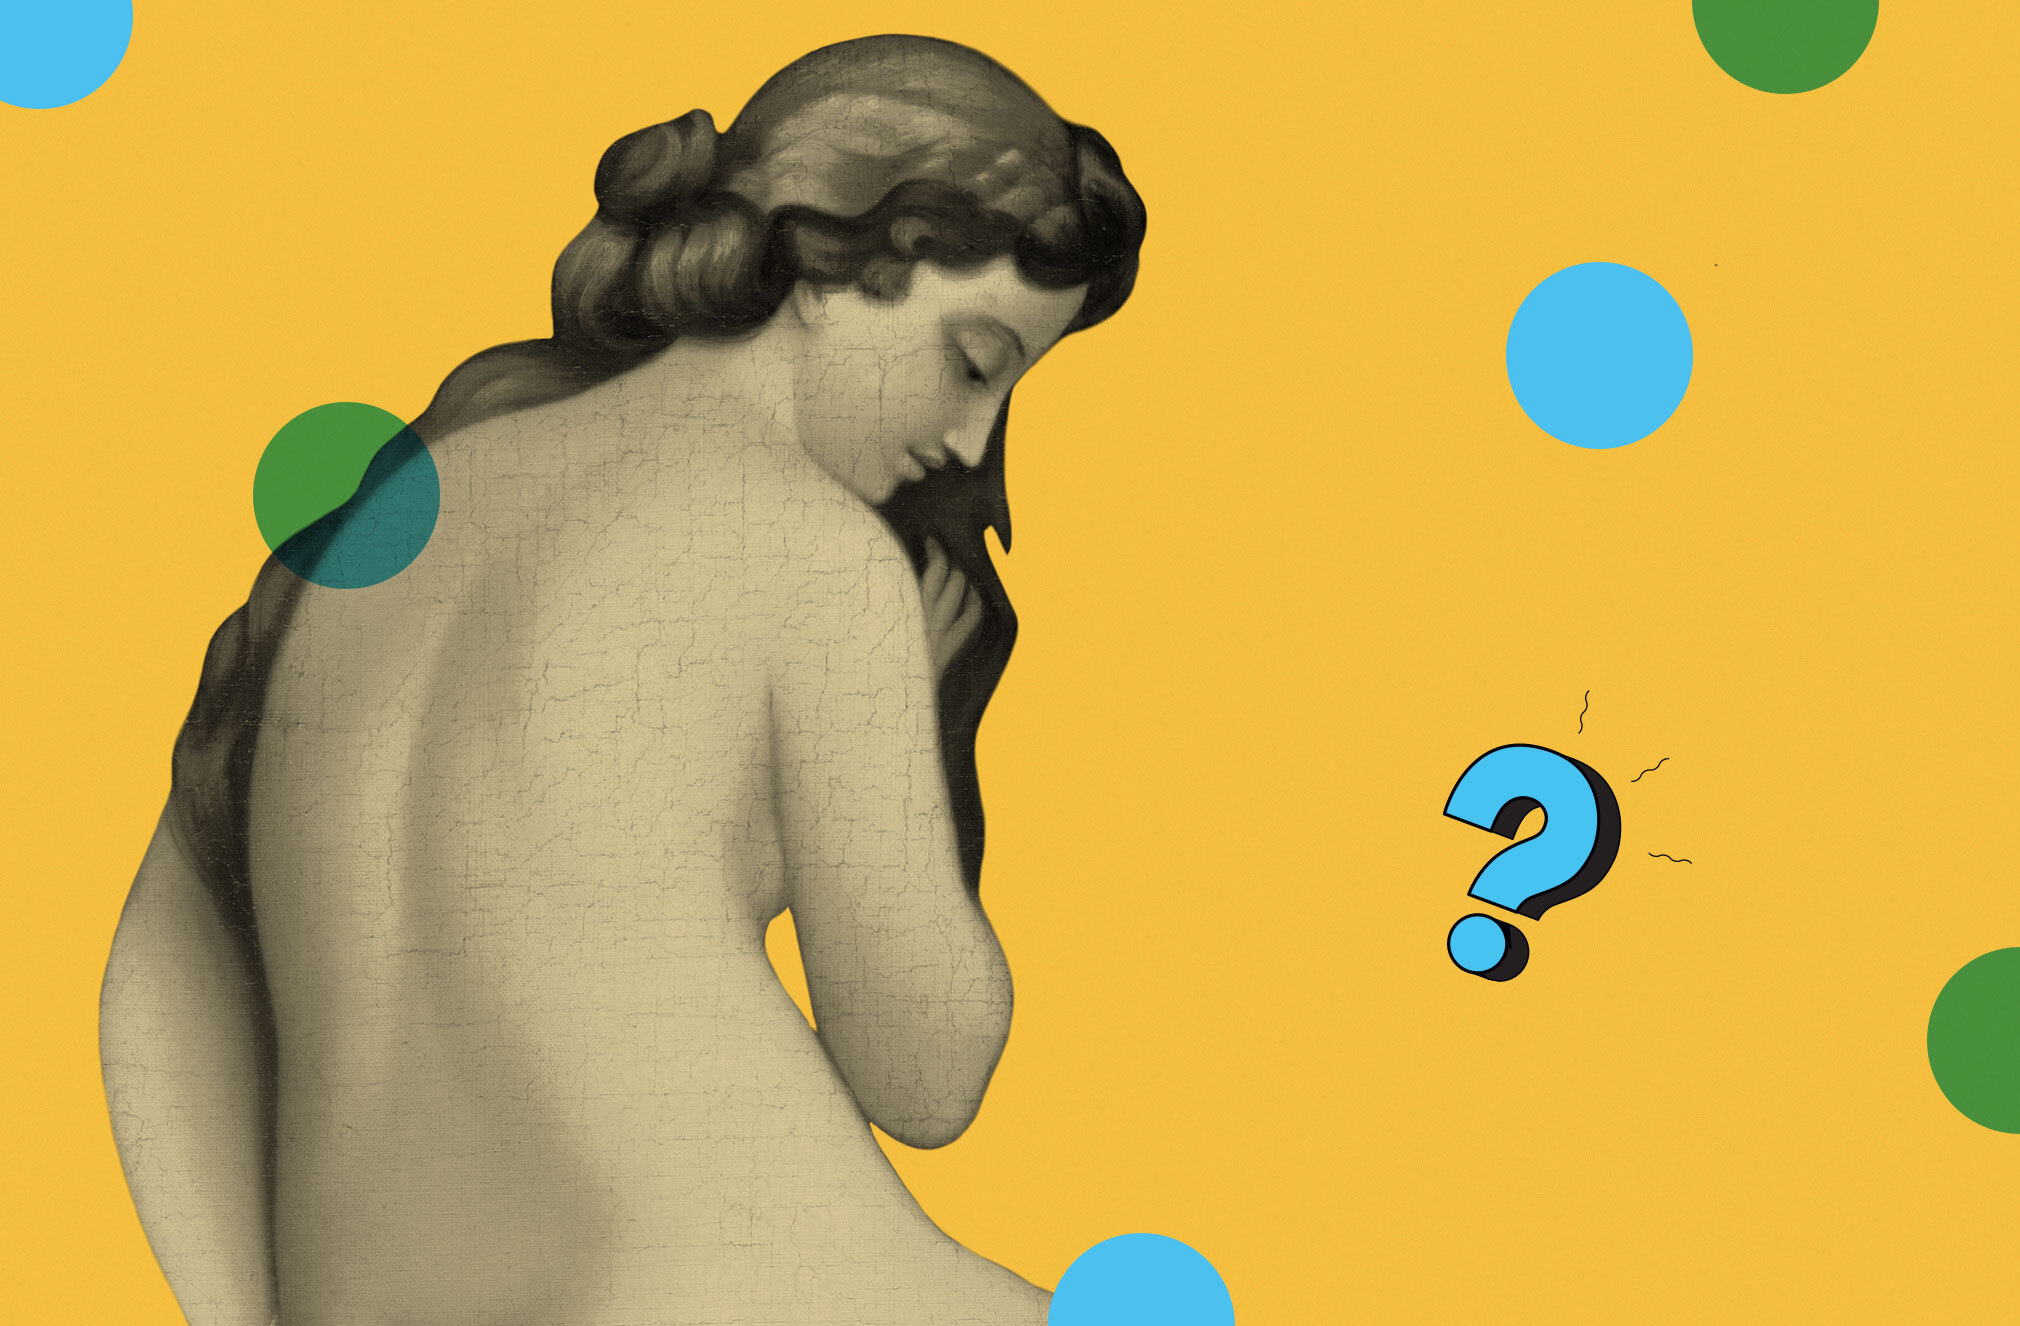 Nude Art Chat - How can you safely send nudes? | Popular Science